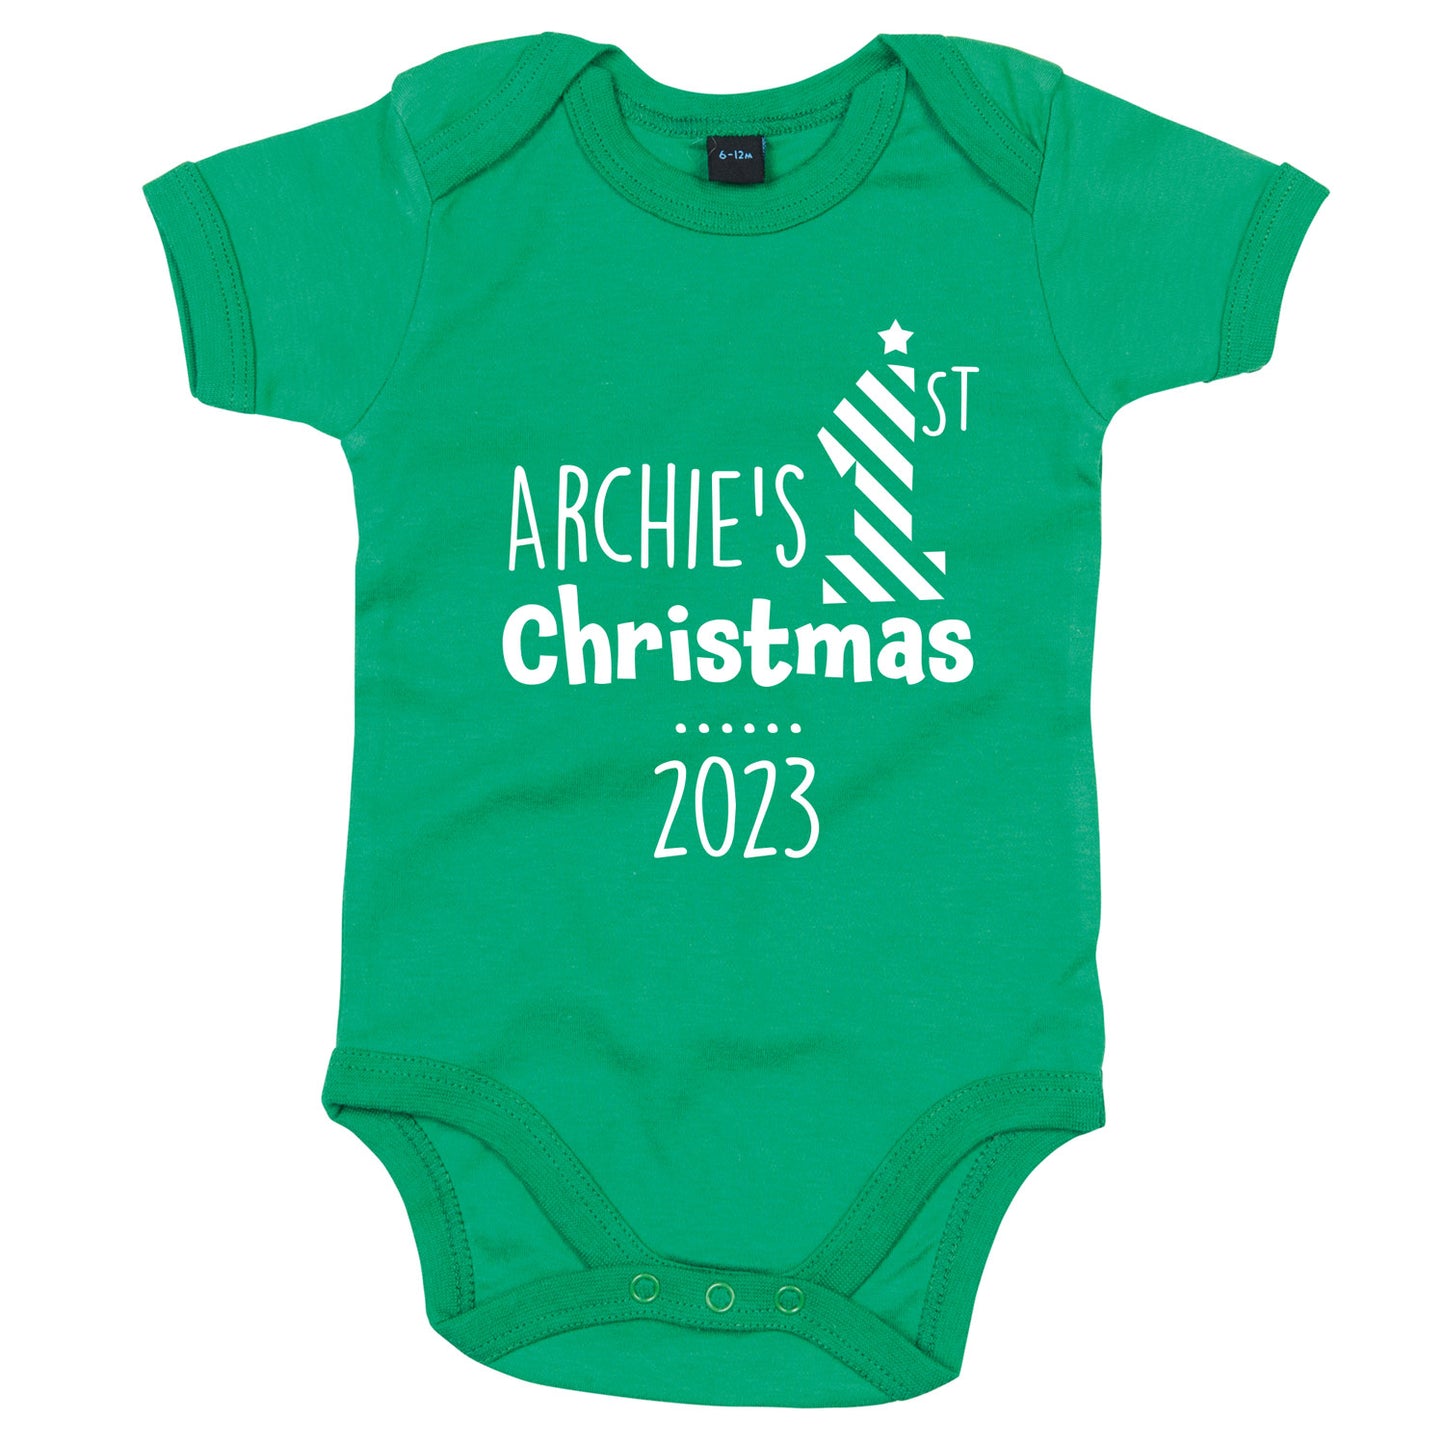 Personalised Babies First Christmas Vest Green